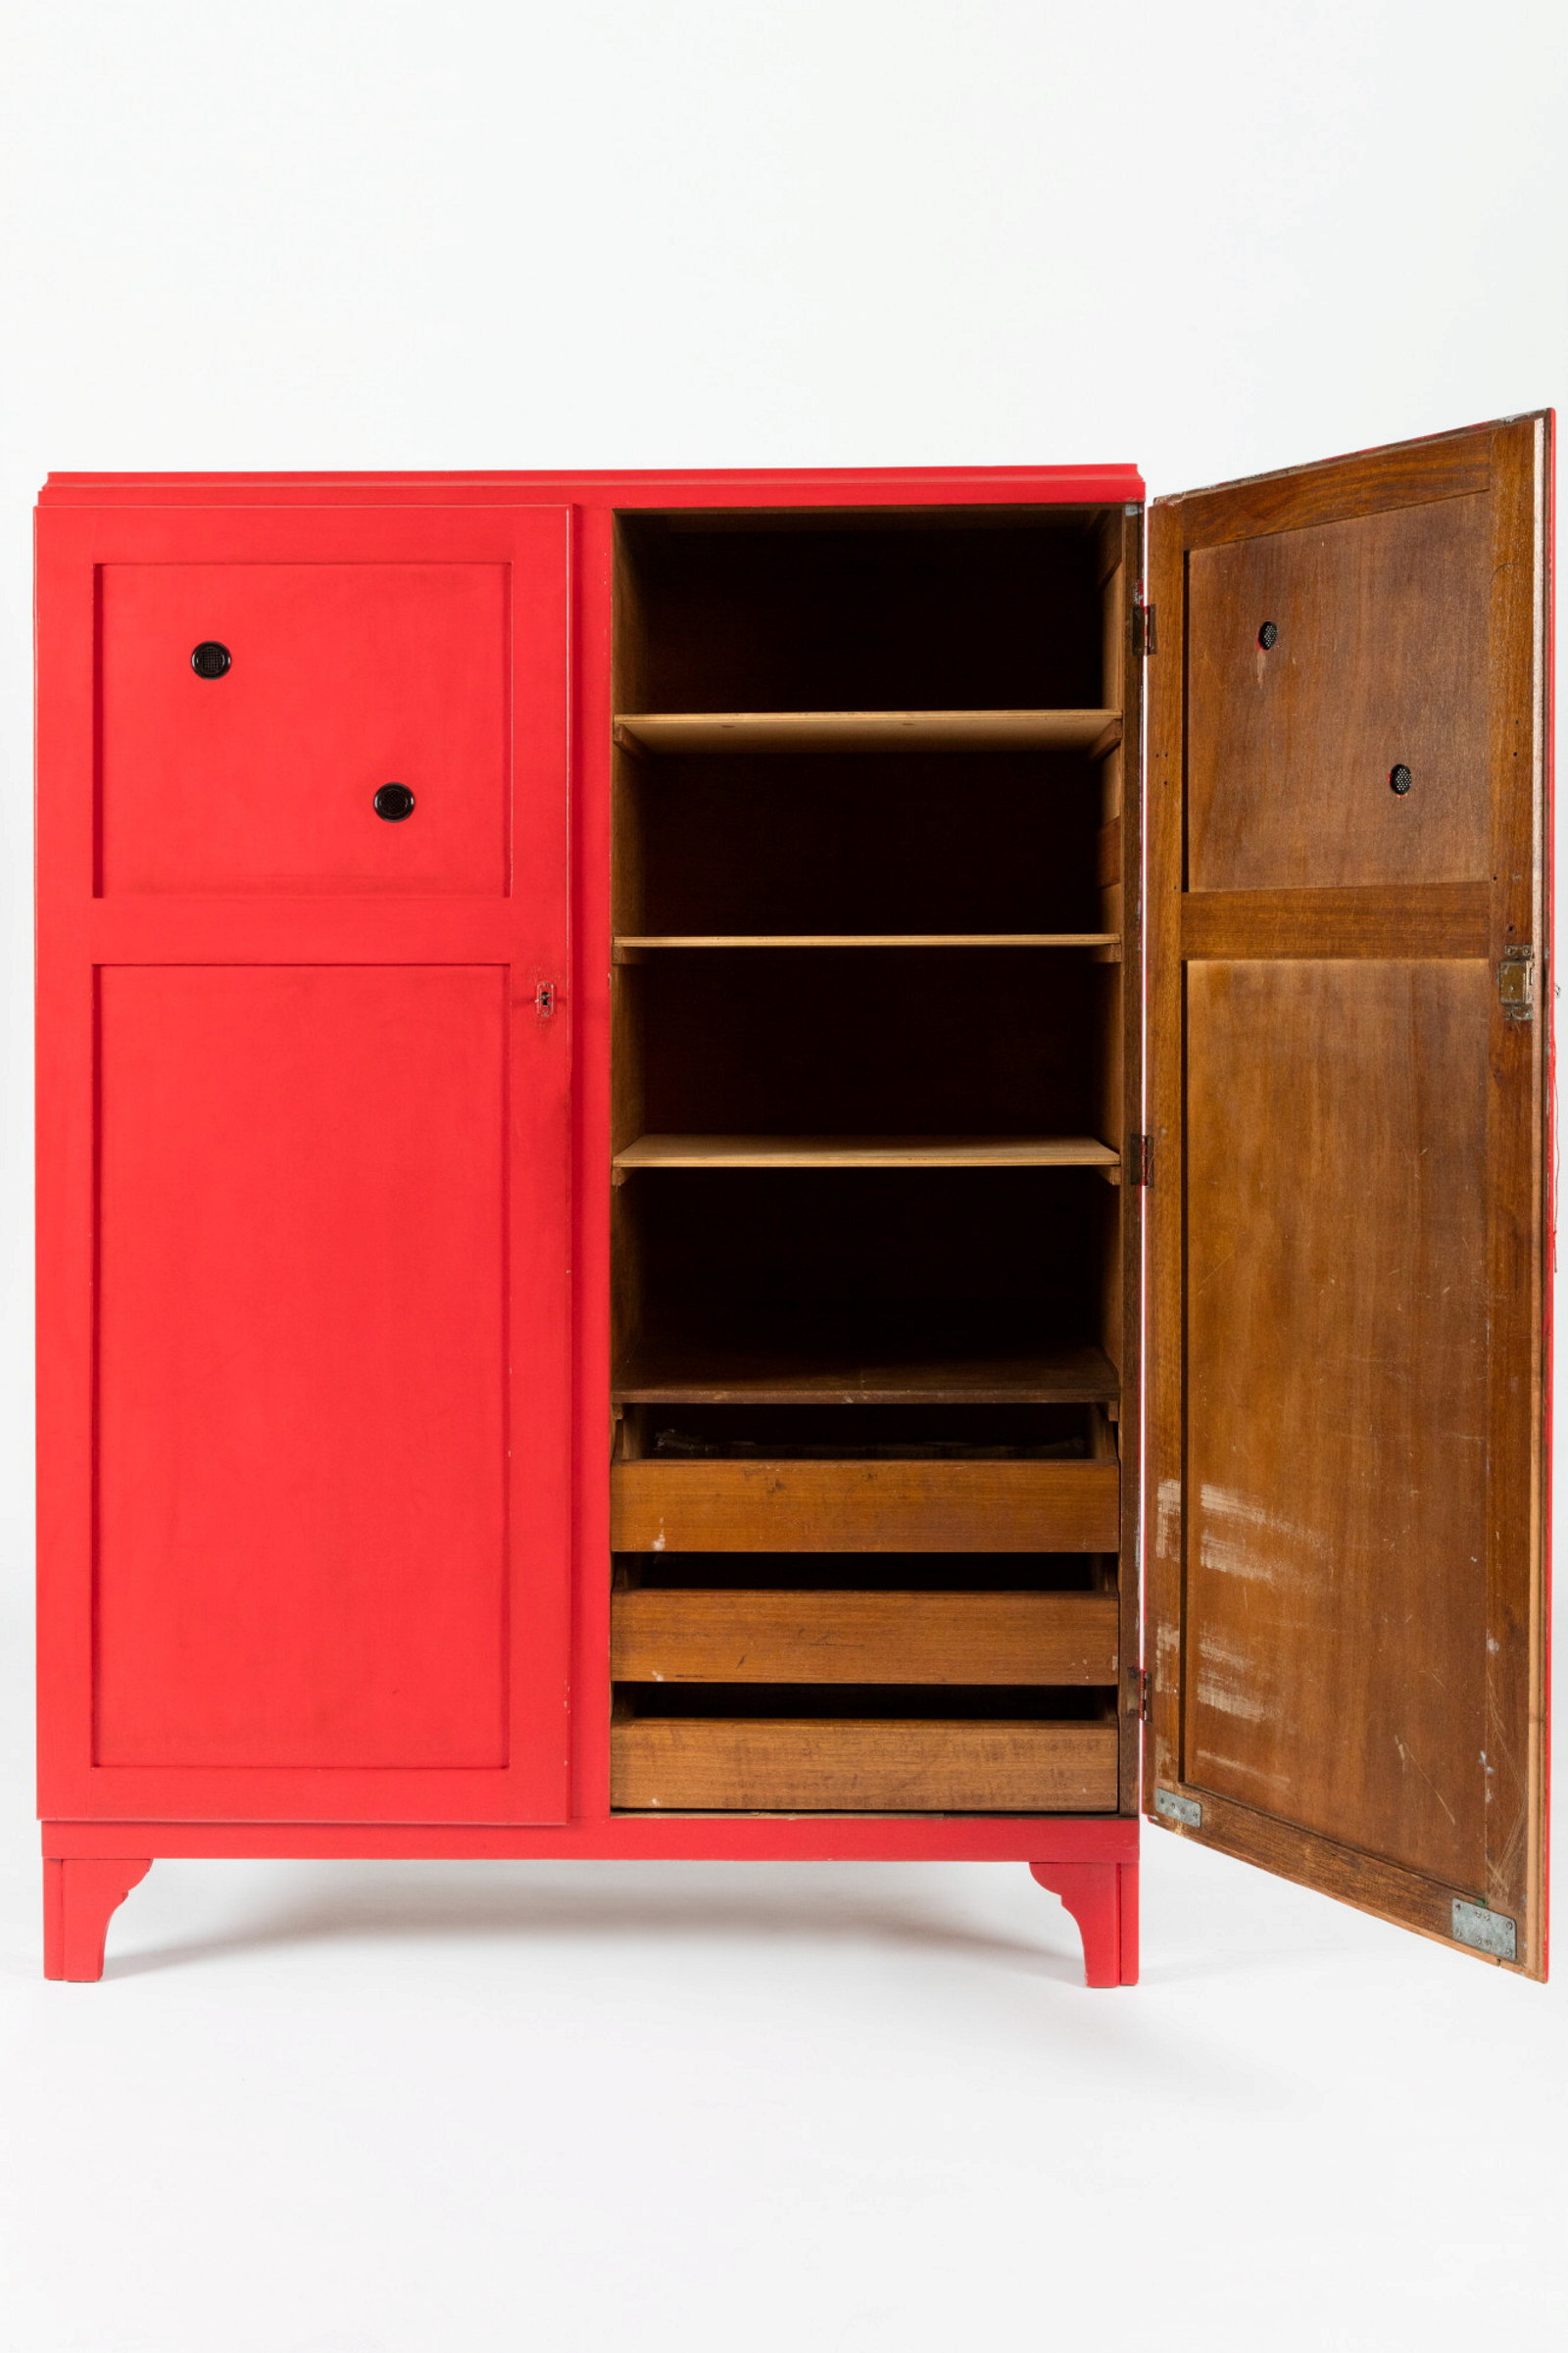 Red timber cupboard with right hand door open to show shelving.